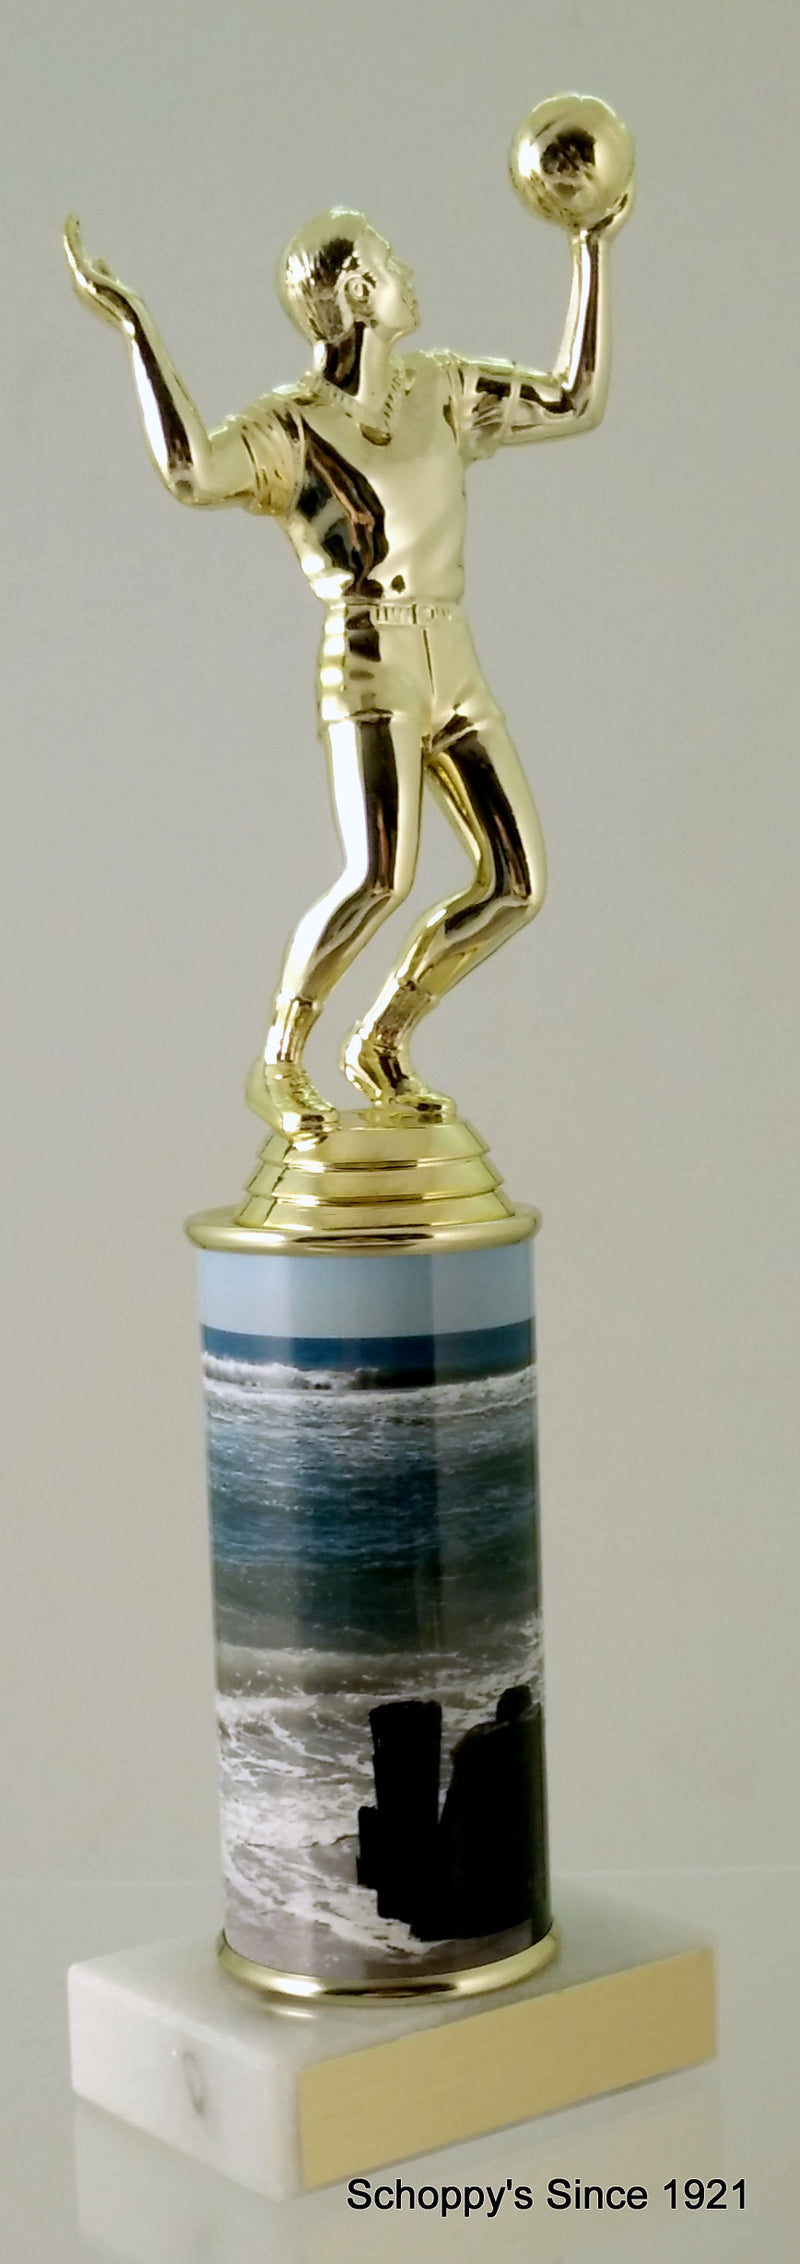 Volleyball Trophy With Beach Metal Column On Marble-Trophy-Schoppy&